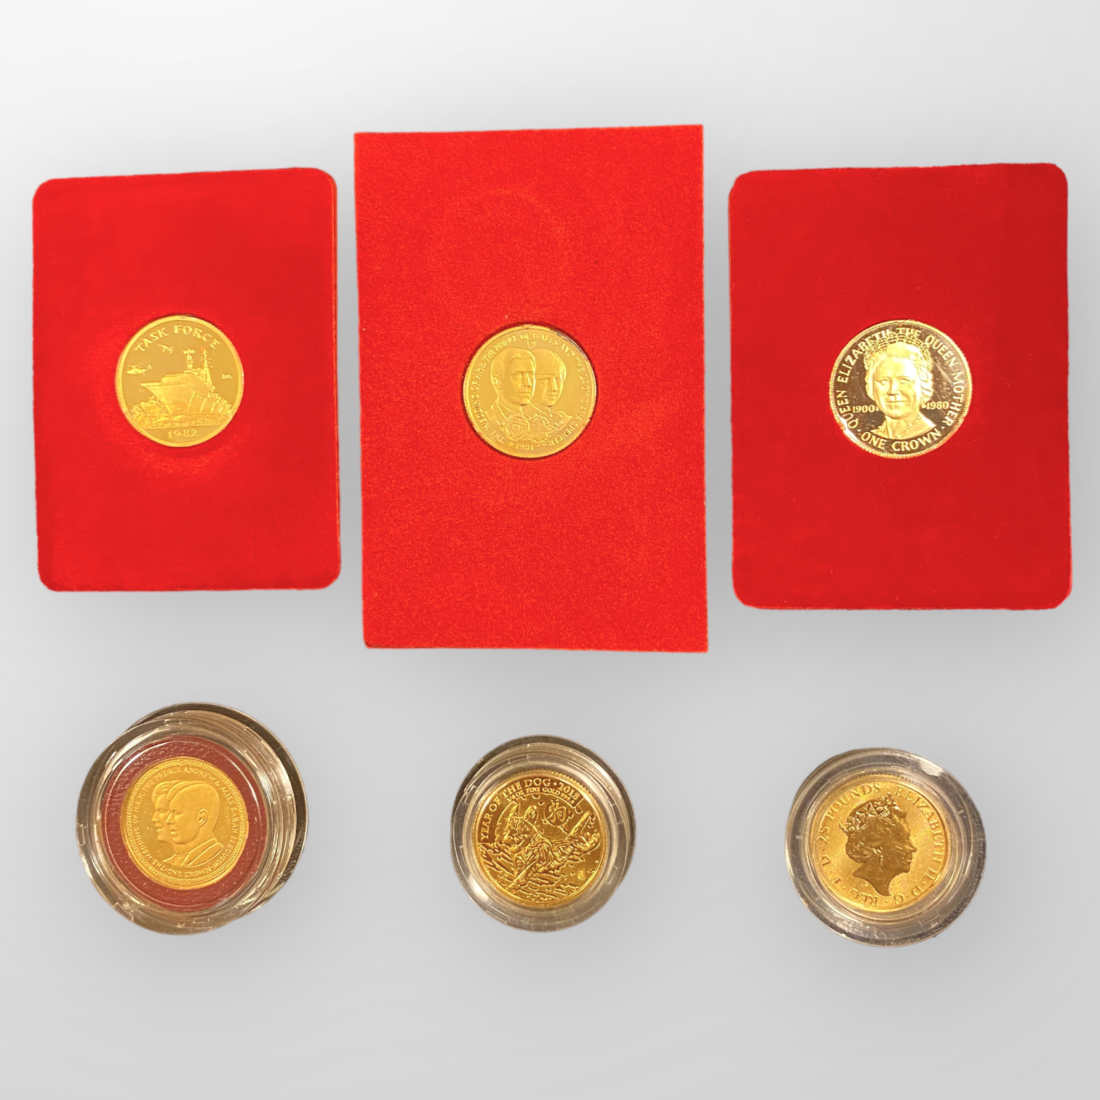 Gold Commemorative Proof Coins